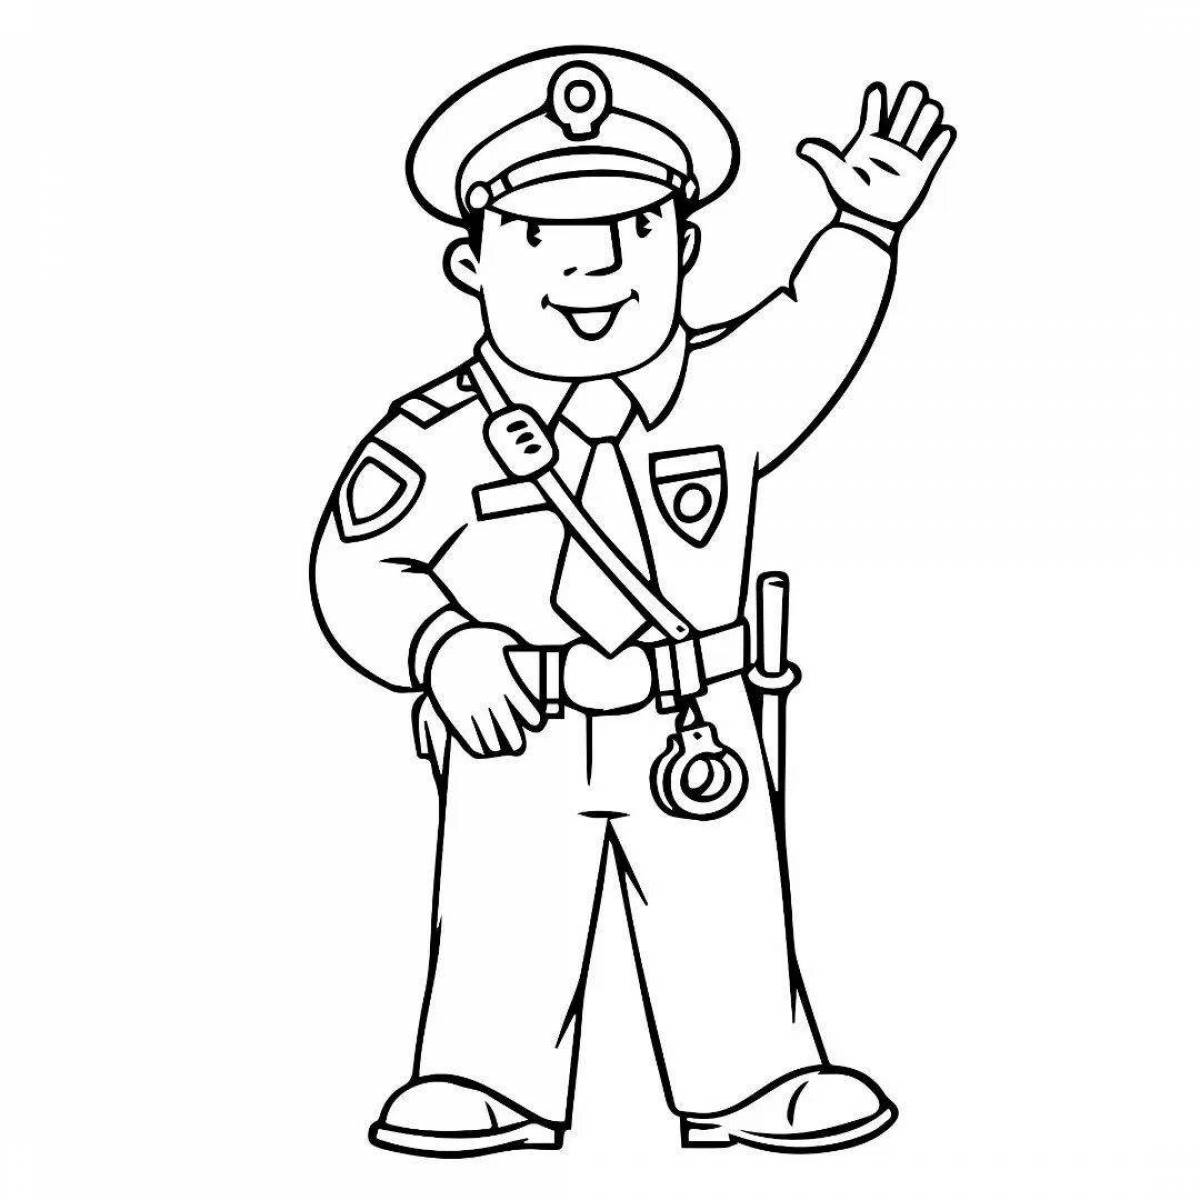 Creative police coloring for kids